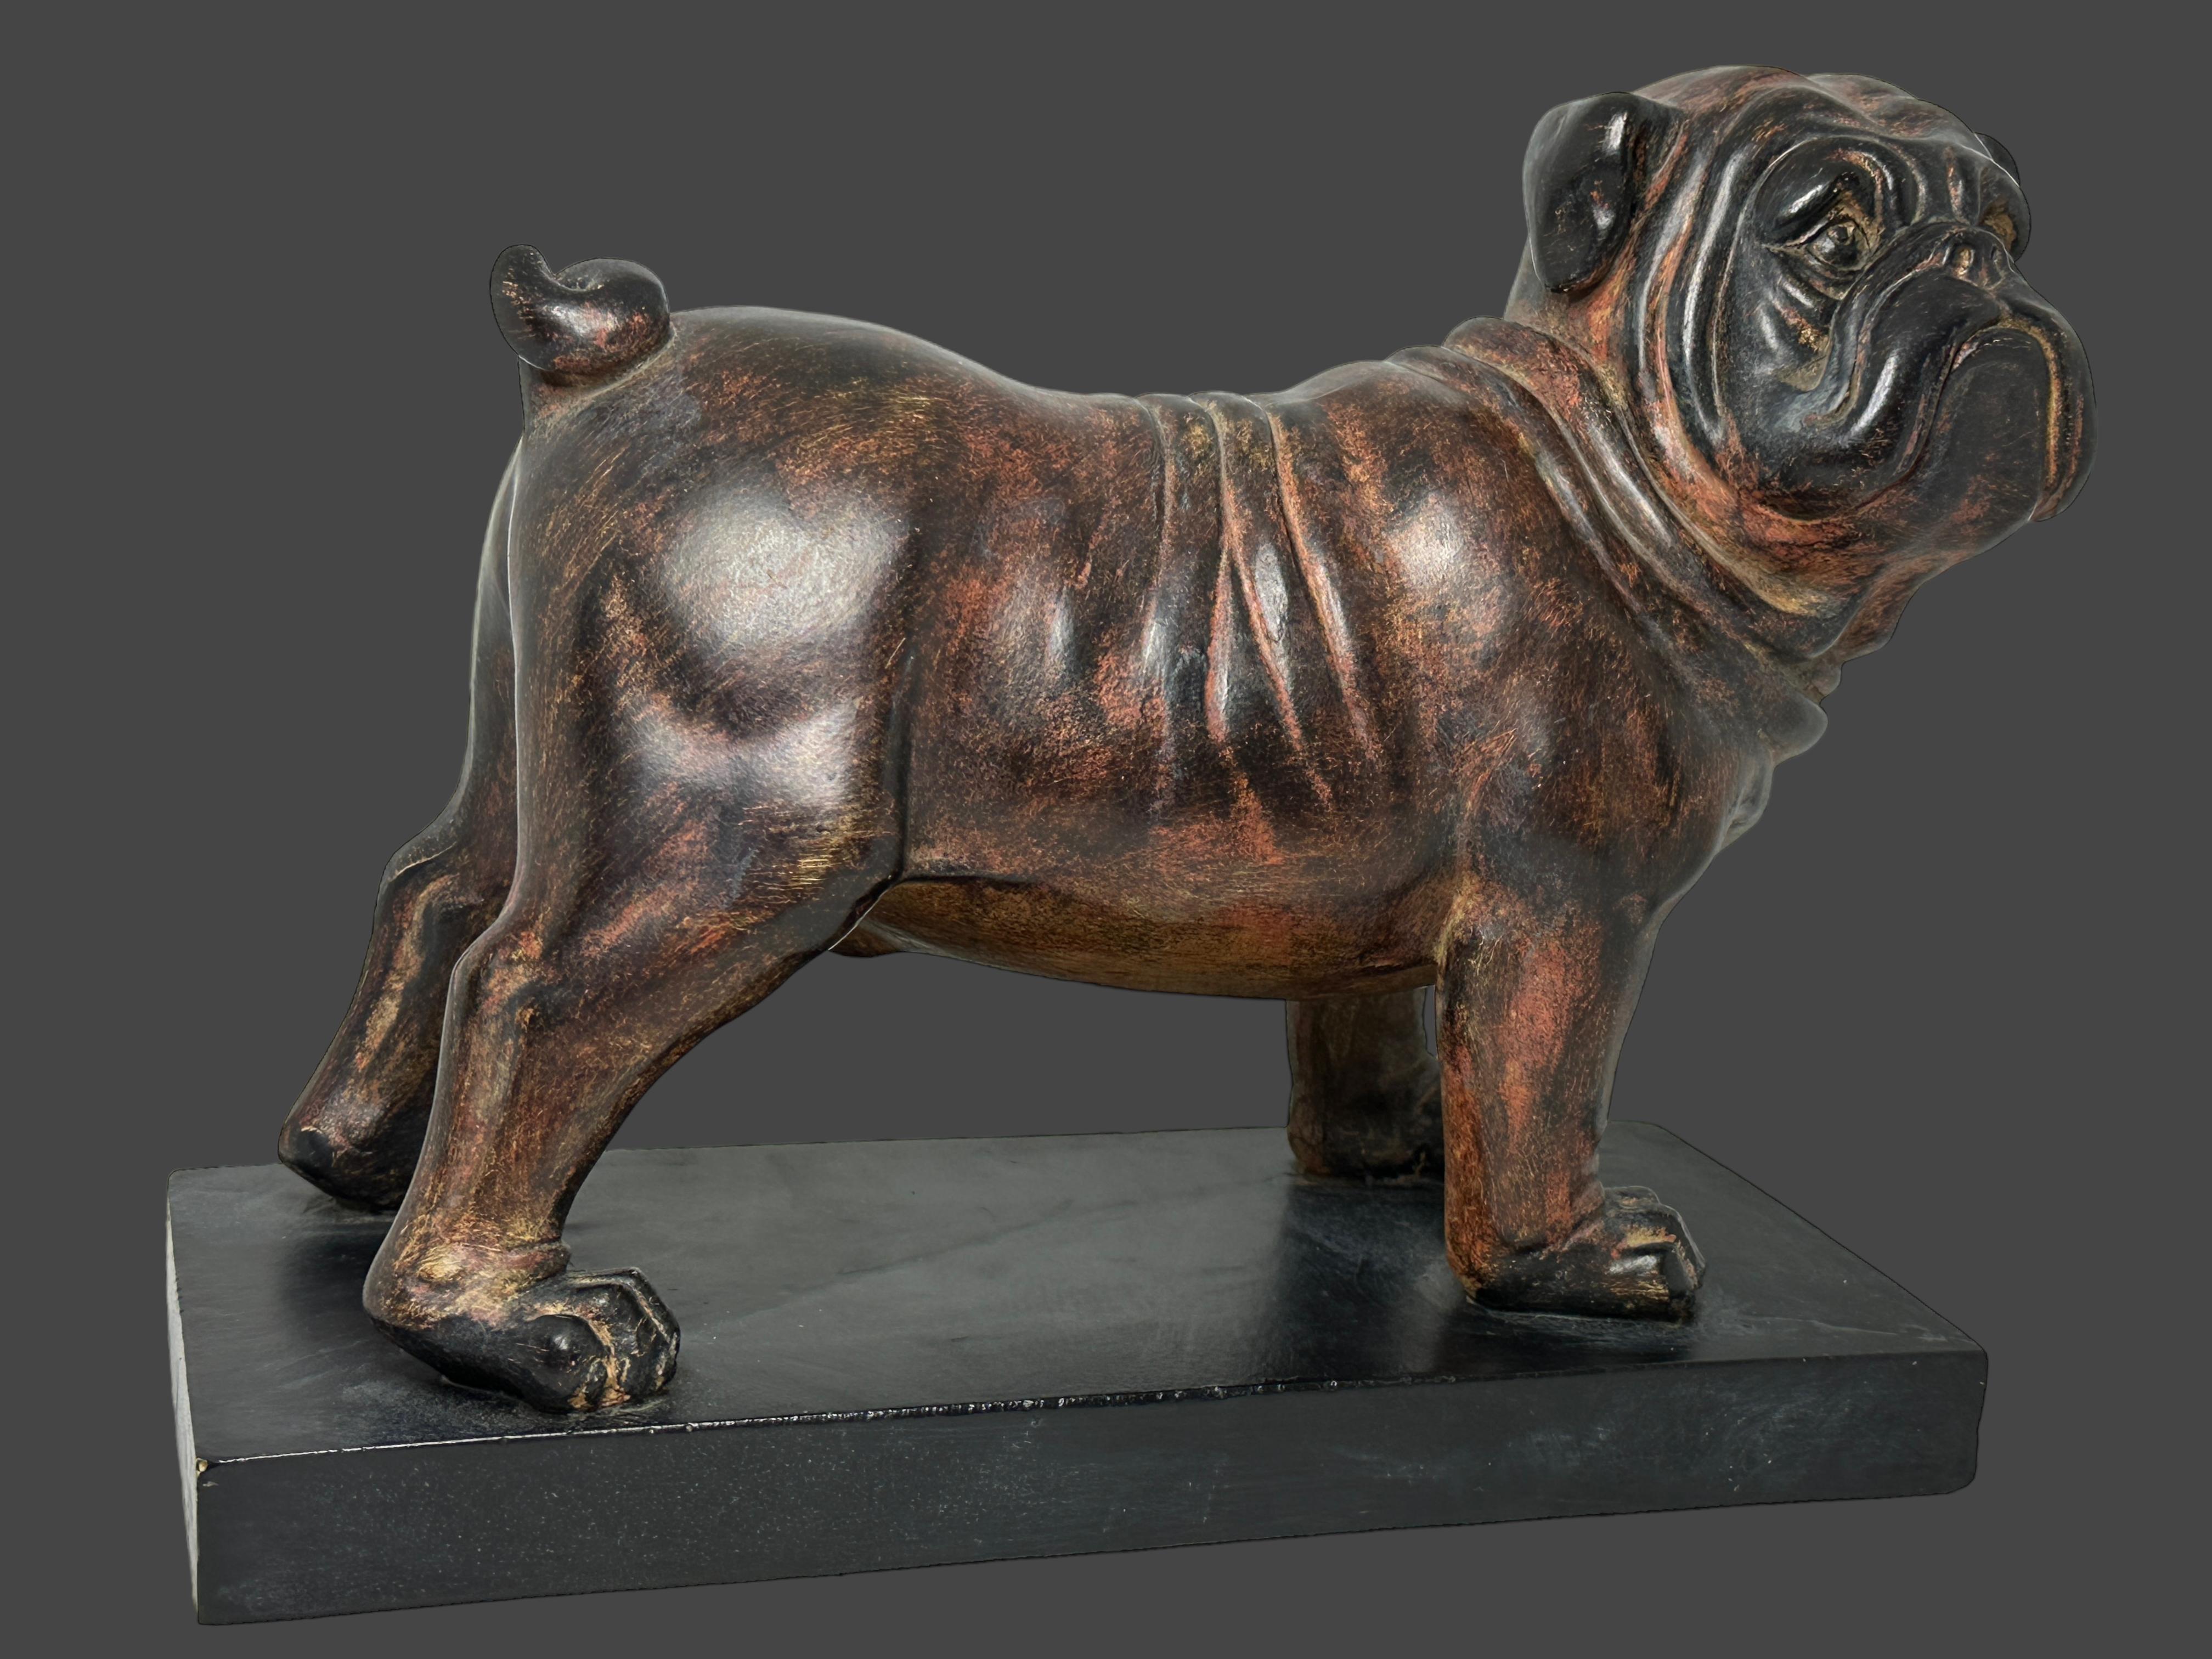 Classic 20th century Austrian Statue, in the style of a Vienna bronze figurine, in beautiful condition. Figurine Statue in the shape of a bull dog in black and brown shades. The figurine stands on the rectangular shaped stand. Unmarked.
Nice